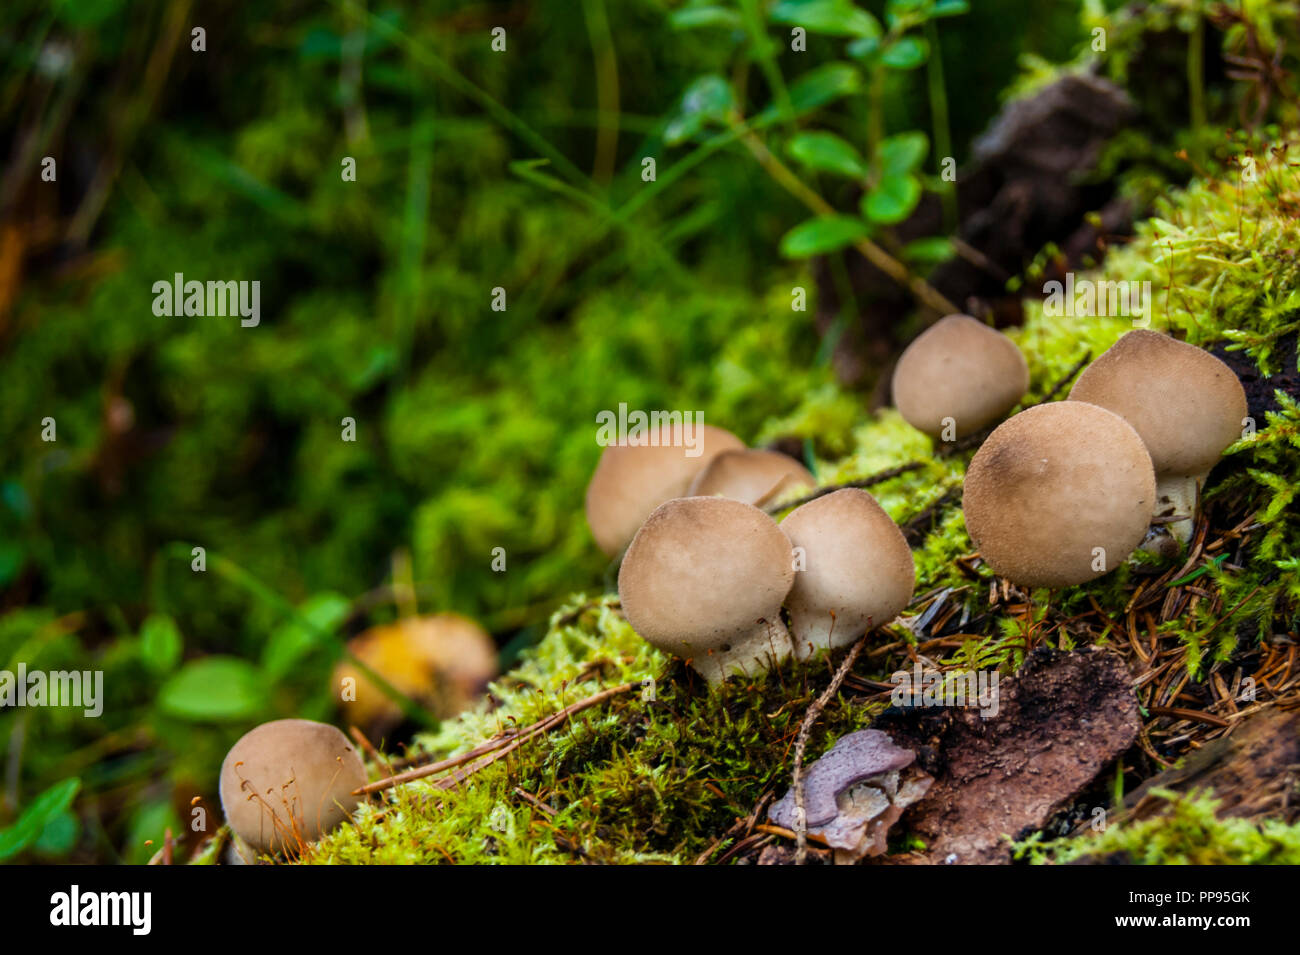 A family of round mushrooms growing on a tree. Close-up of mushrooms. Stock Photo